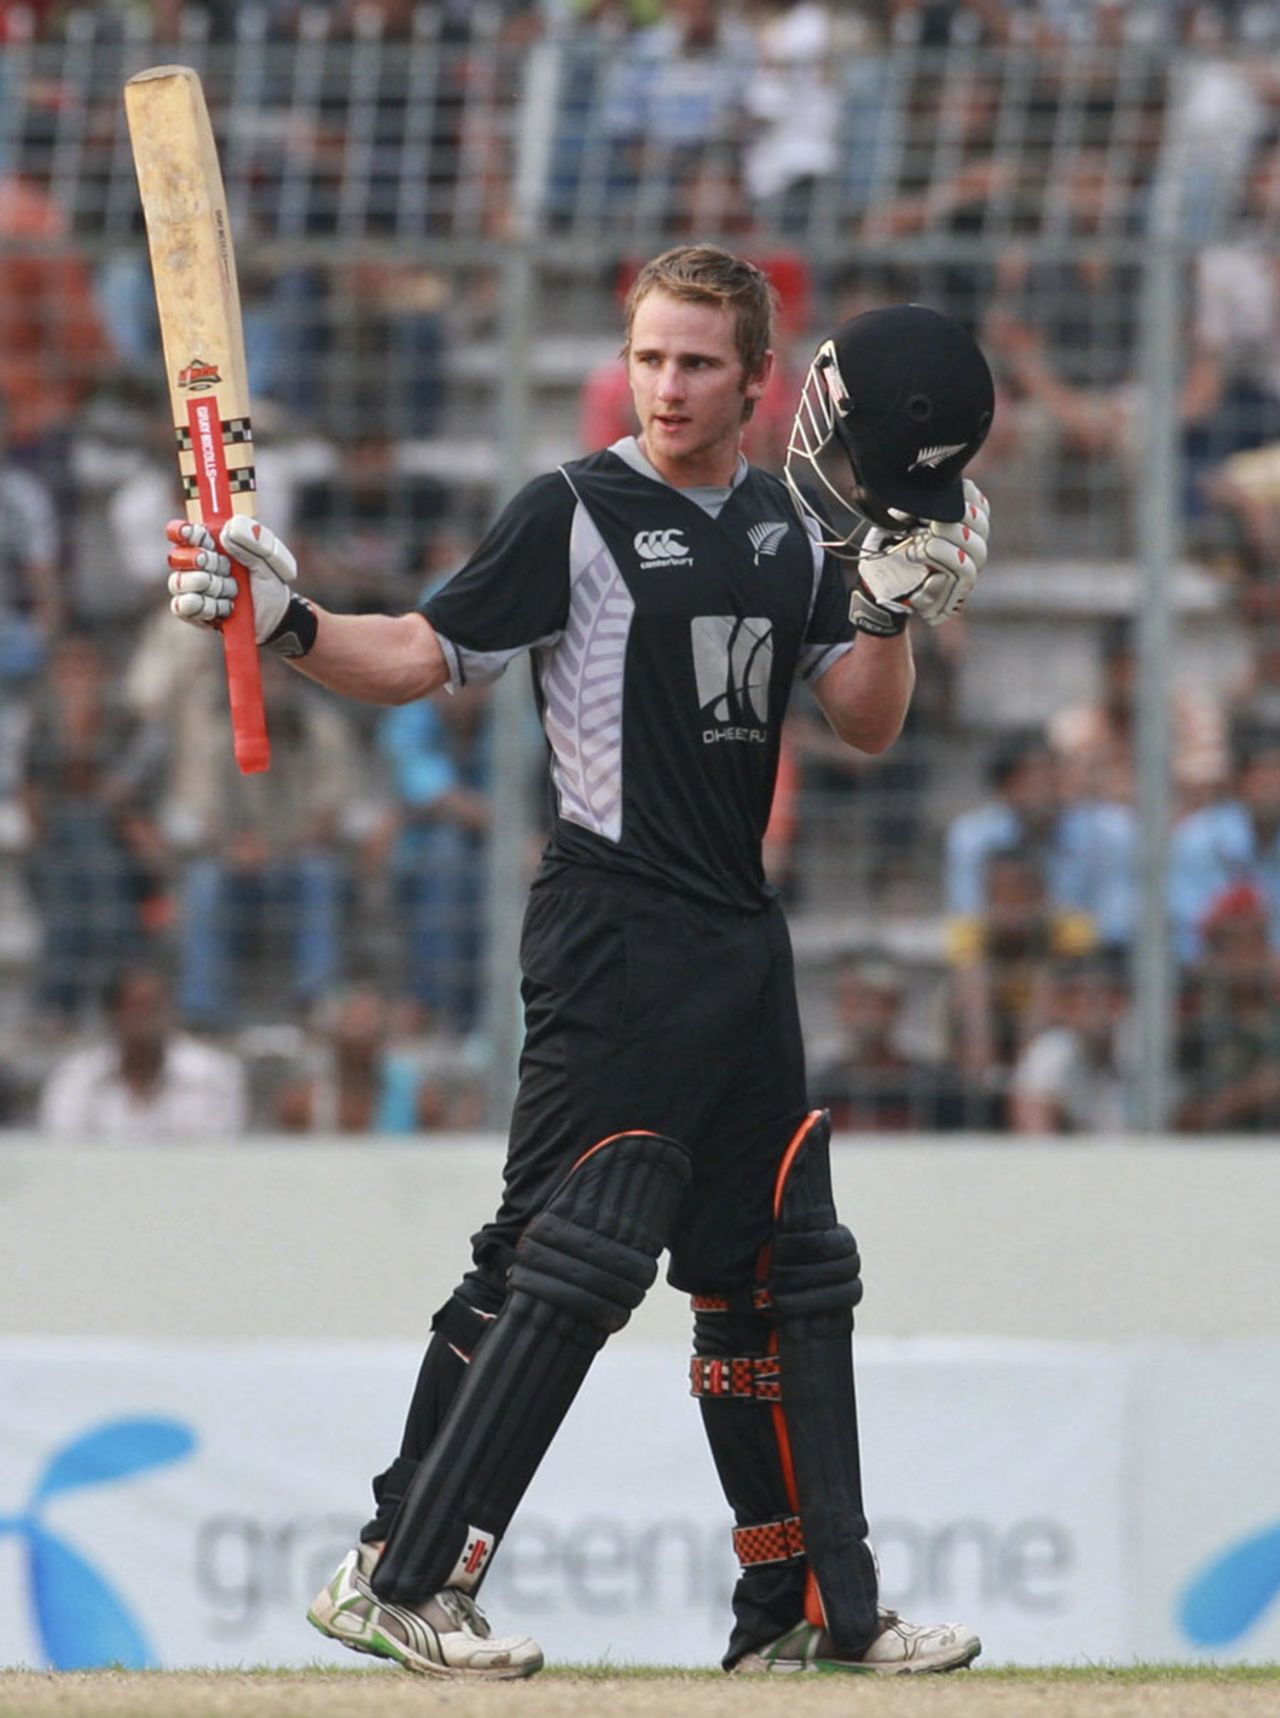 Kane Williamson acknowledges the crowd after reaching his maiden ODI hundred, Bangladesh v New Zealand, 4th ODI, Mirpur, October 14, 2010